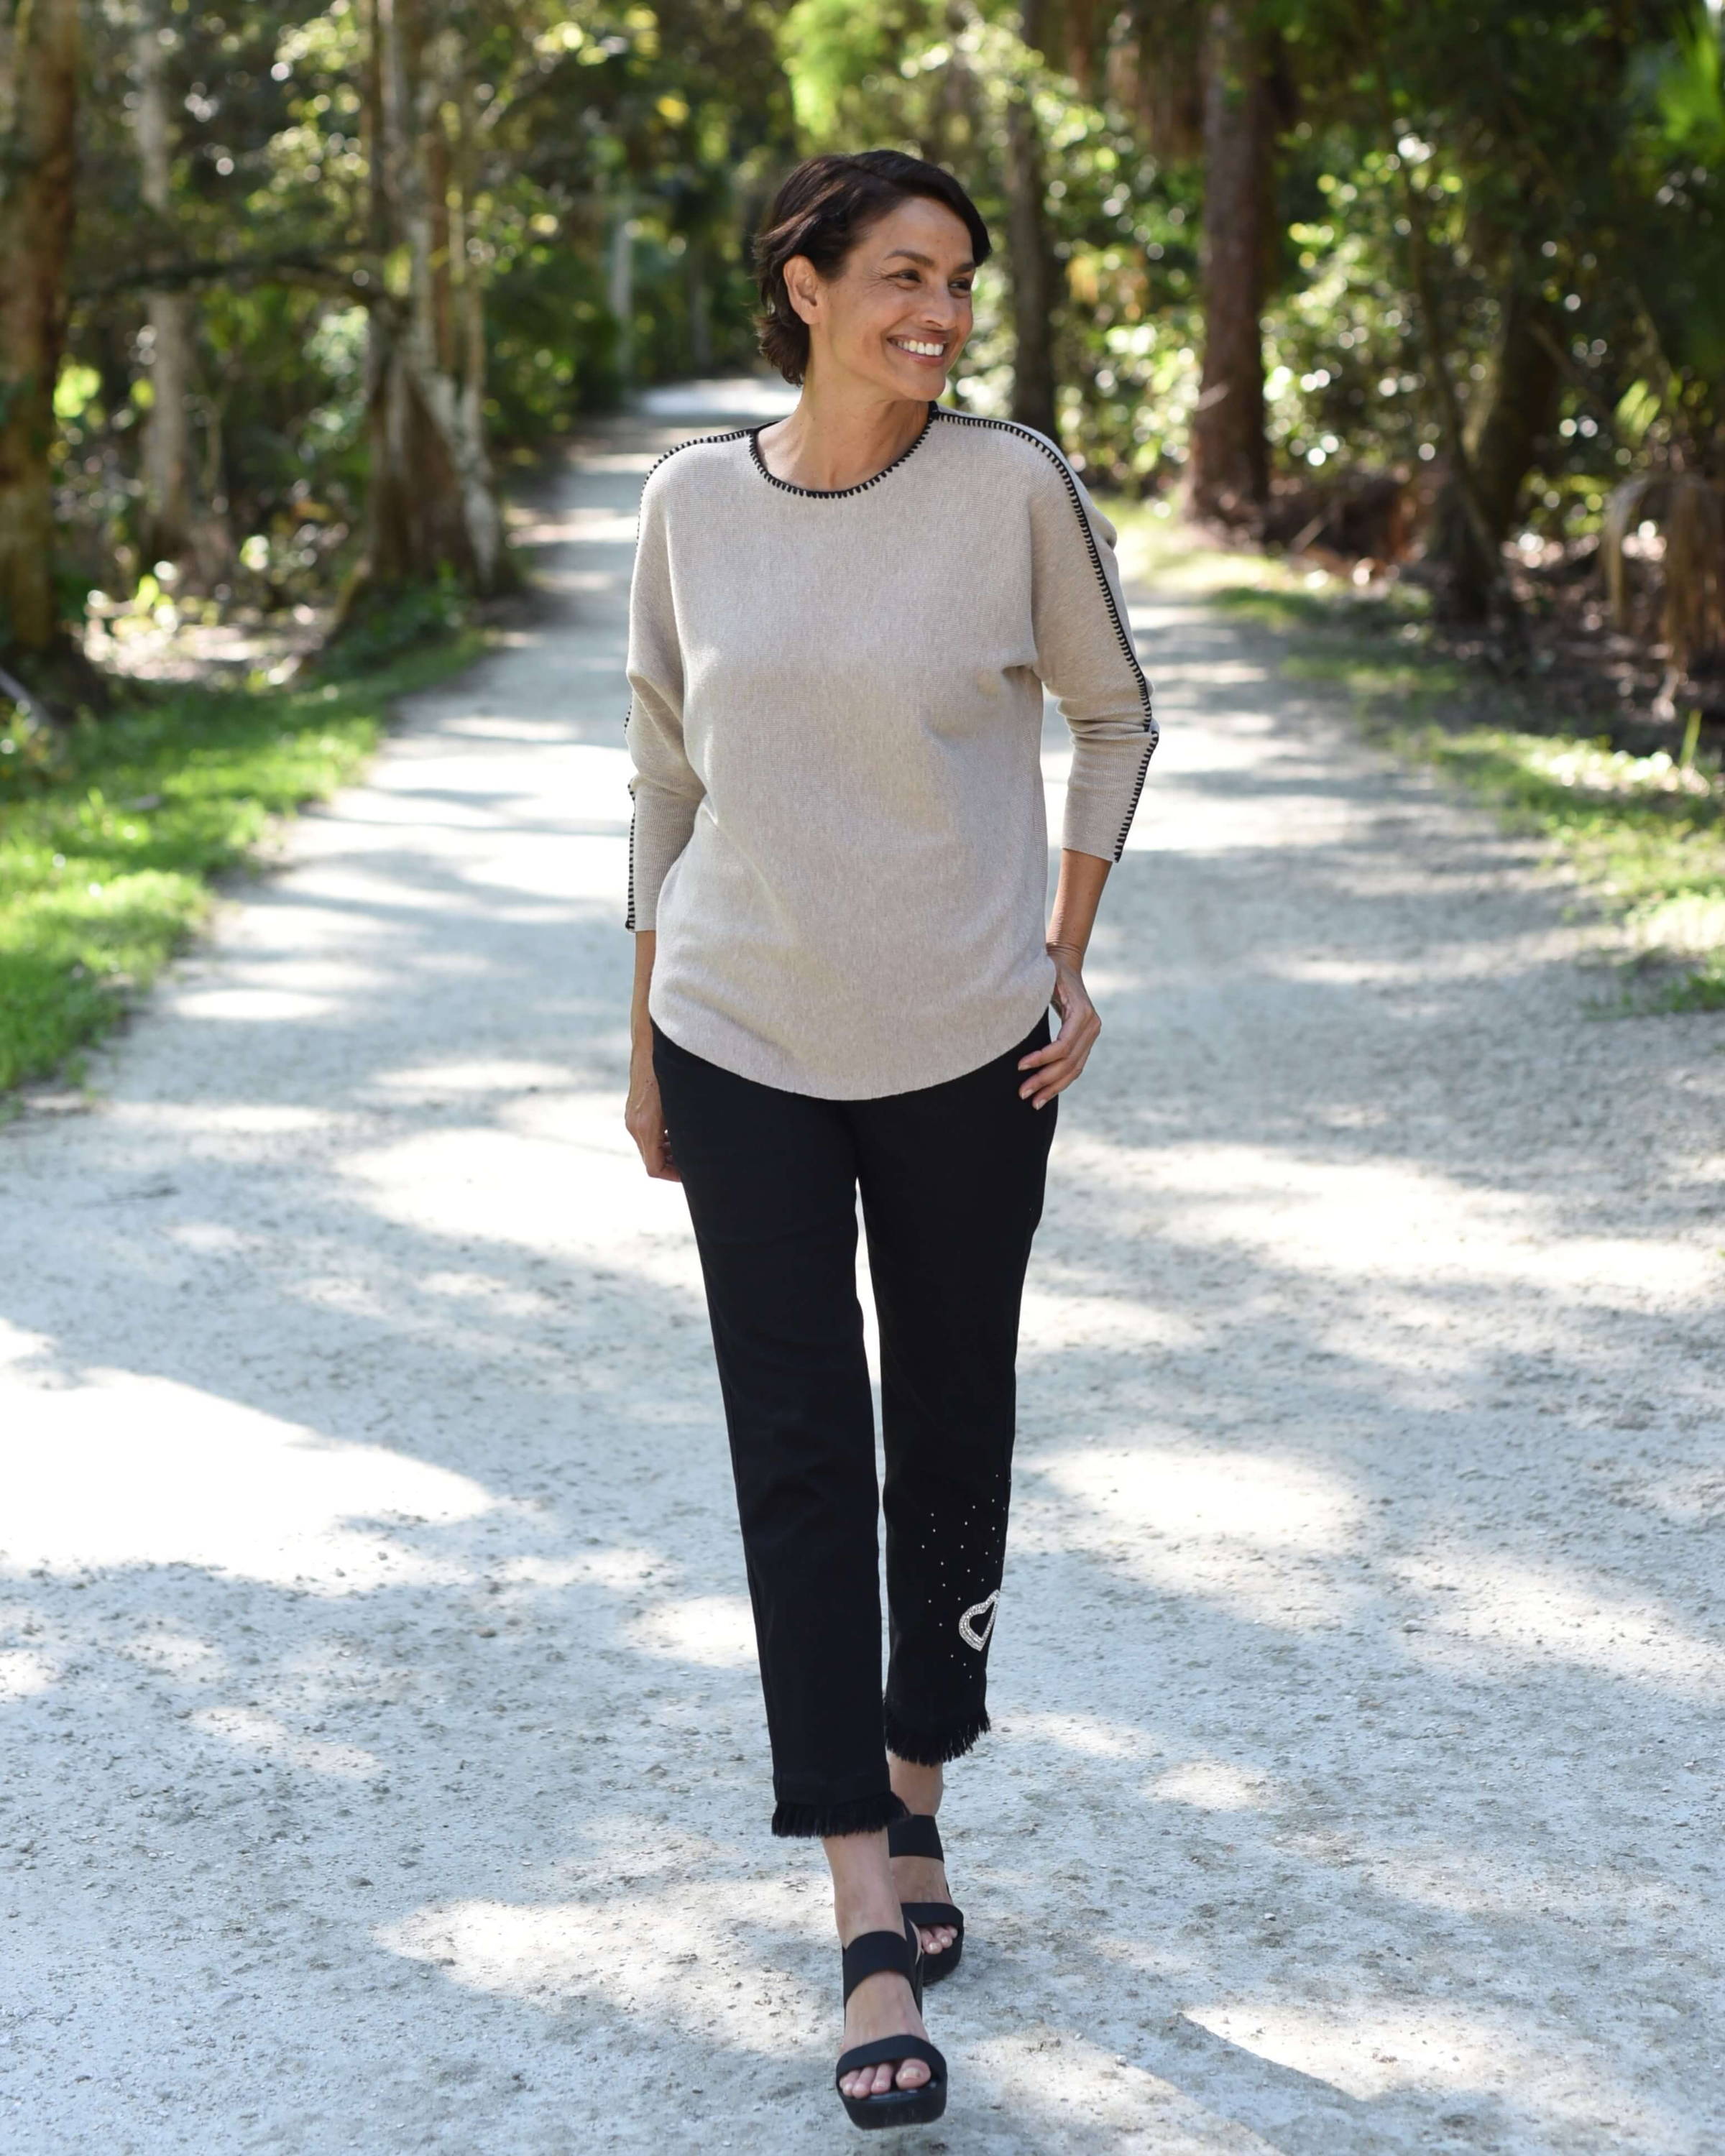 A woman with short dark hair walks down a paved path in a wooded area.